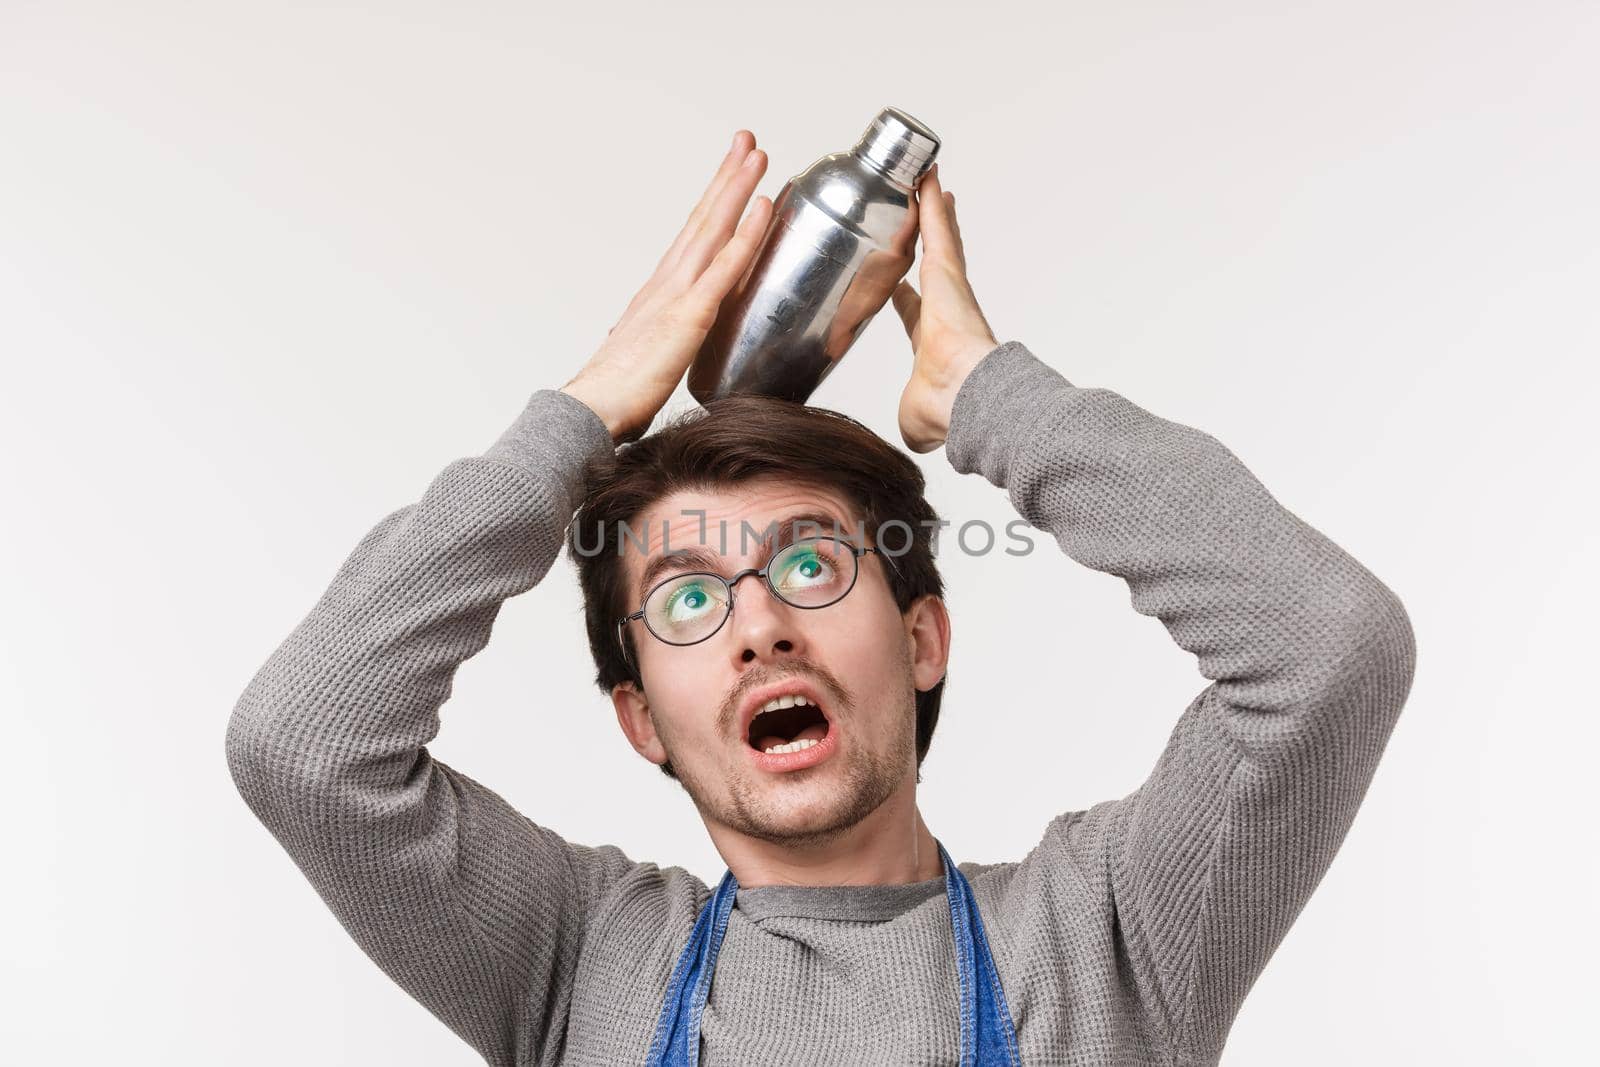 Close-up portrait of funny caucasian male bartender in apron and glasses balancing shaker on head as its falling on ground, standing white background fool around while there are no customers.